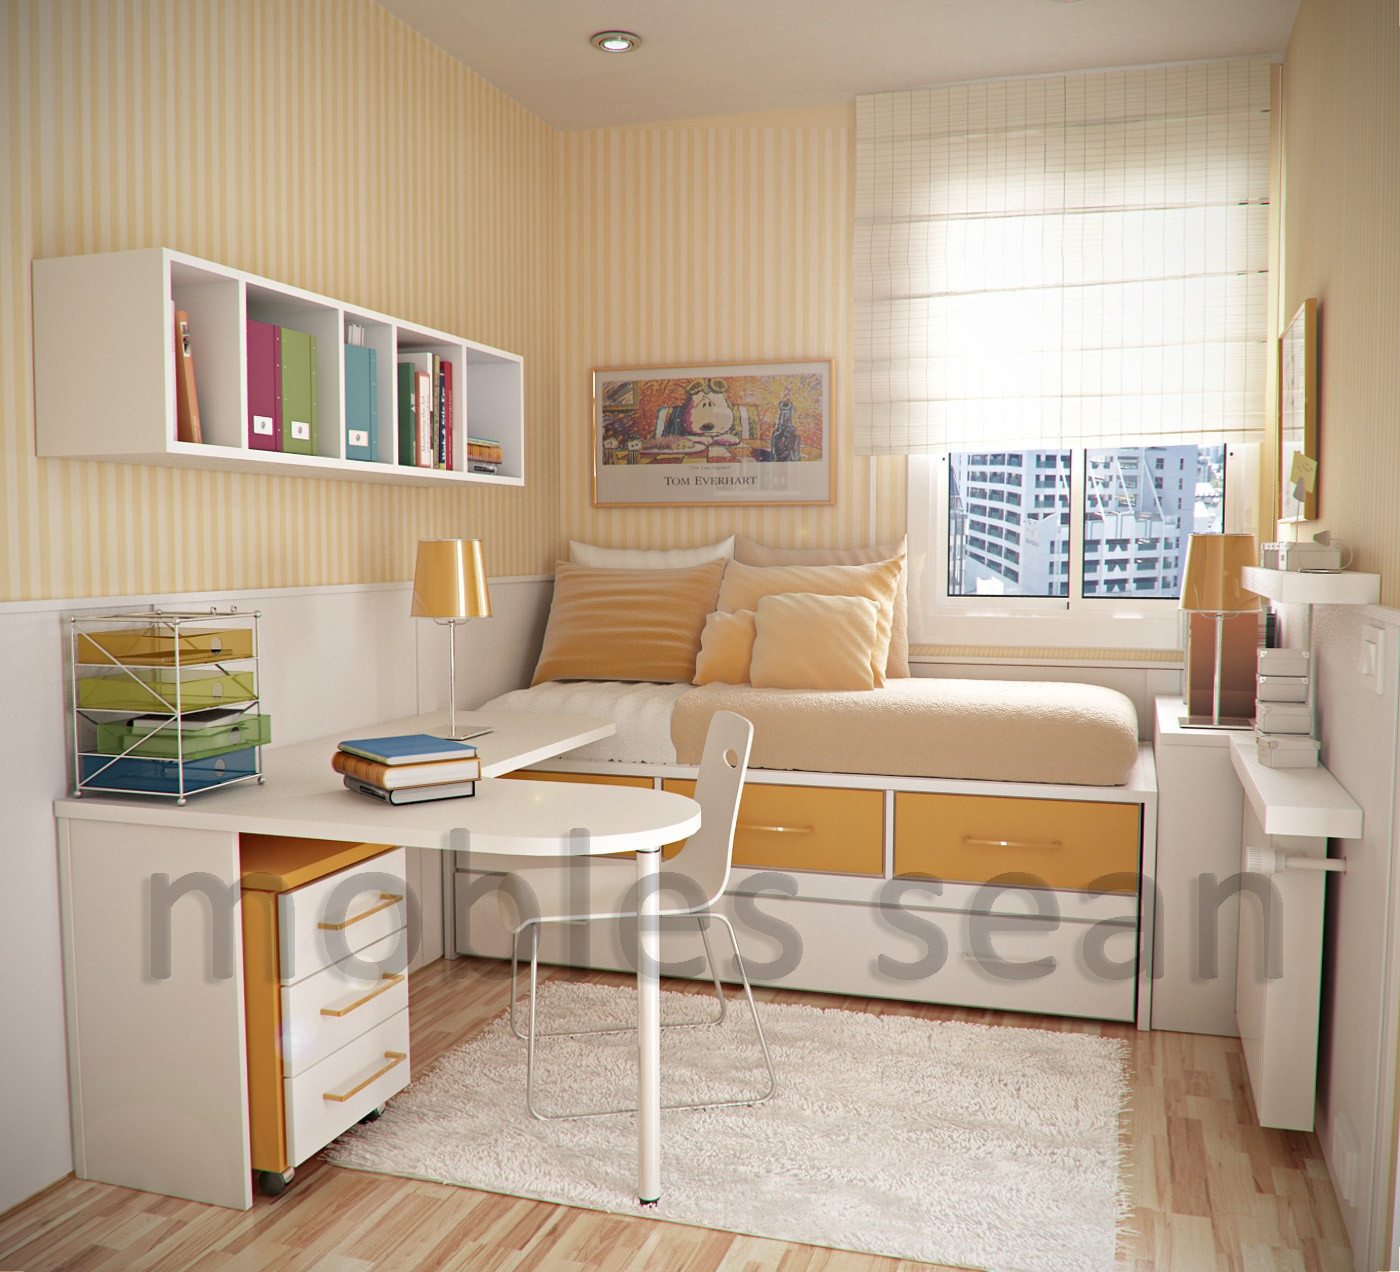 Small Kids Bedroom
 Space Saving Designs for Small Kids’ Rooms Home Decoz